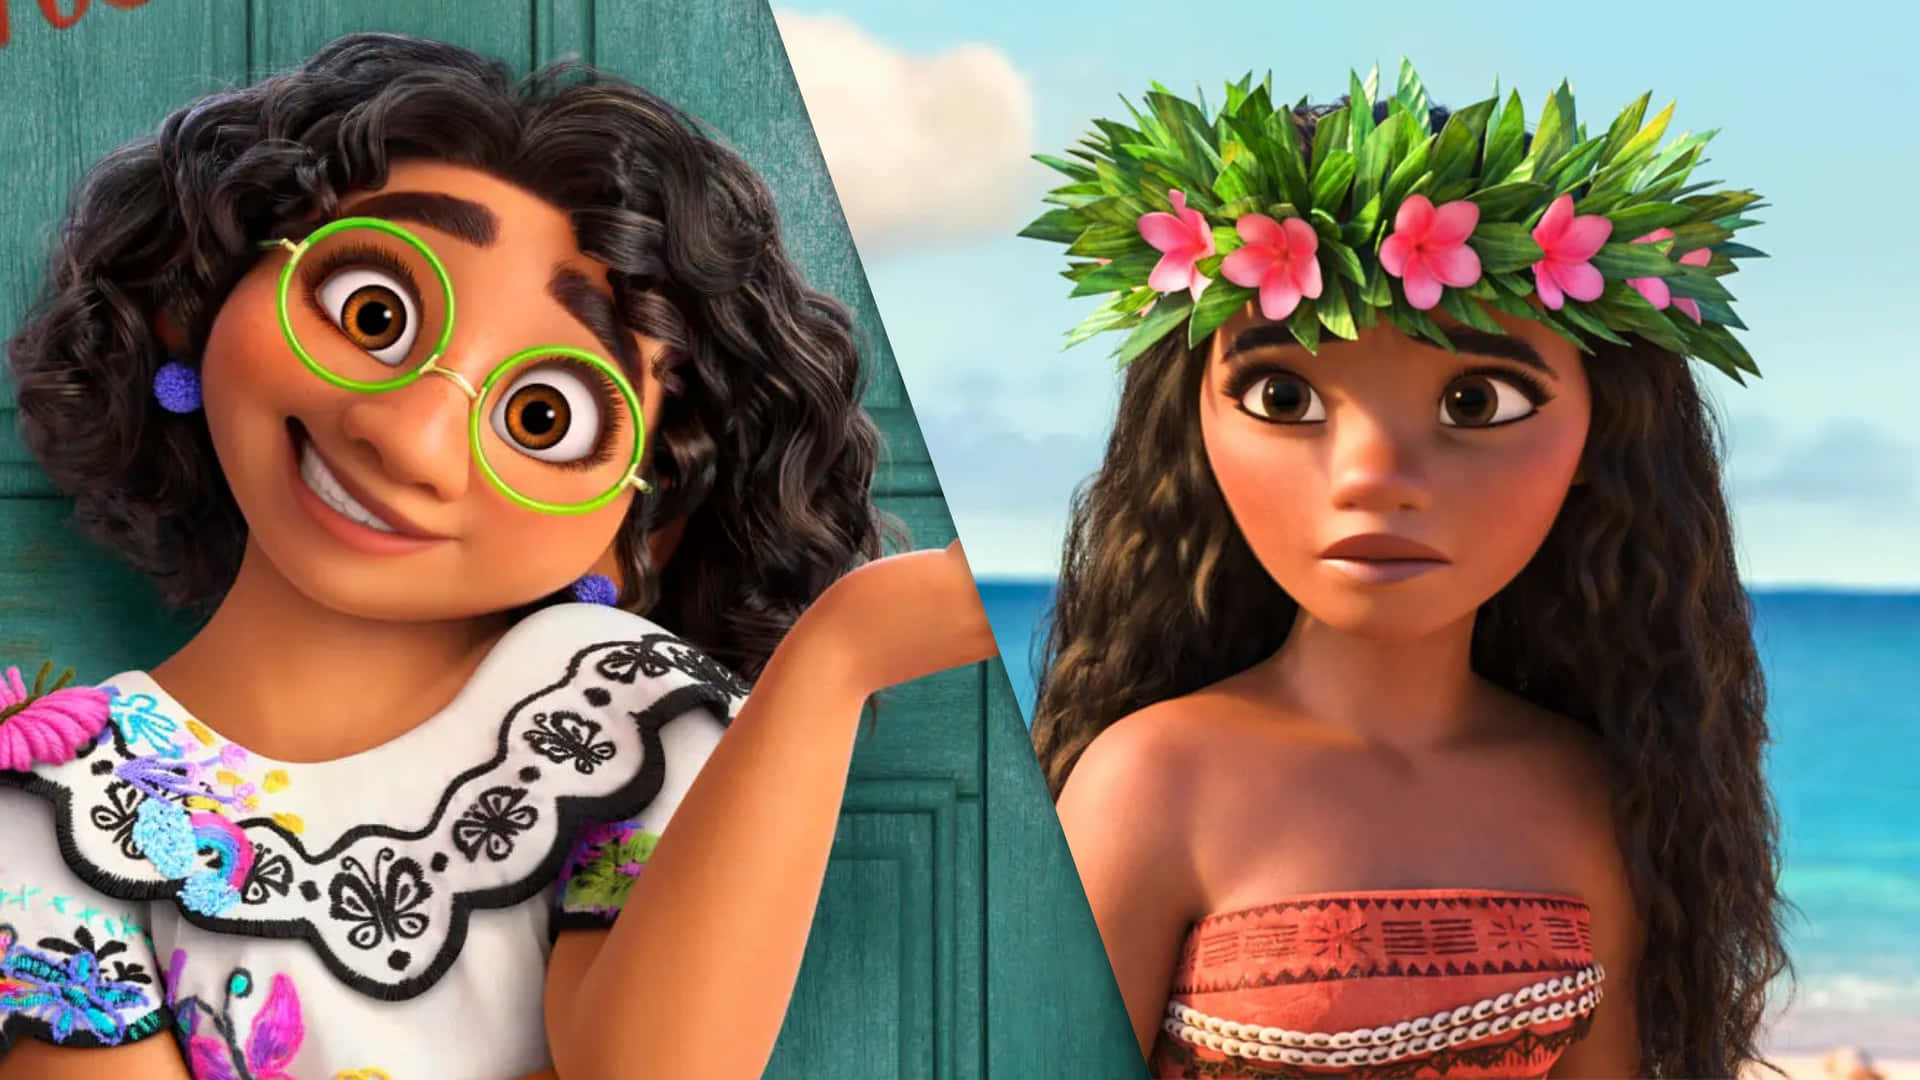 Moana sets off on an epic adventure